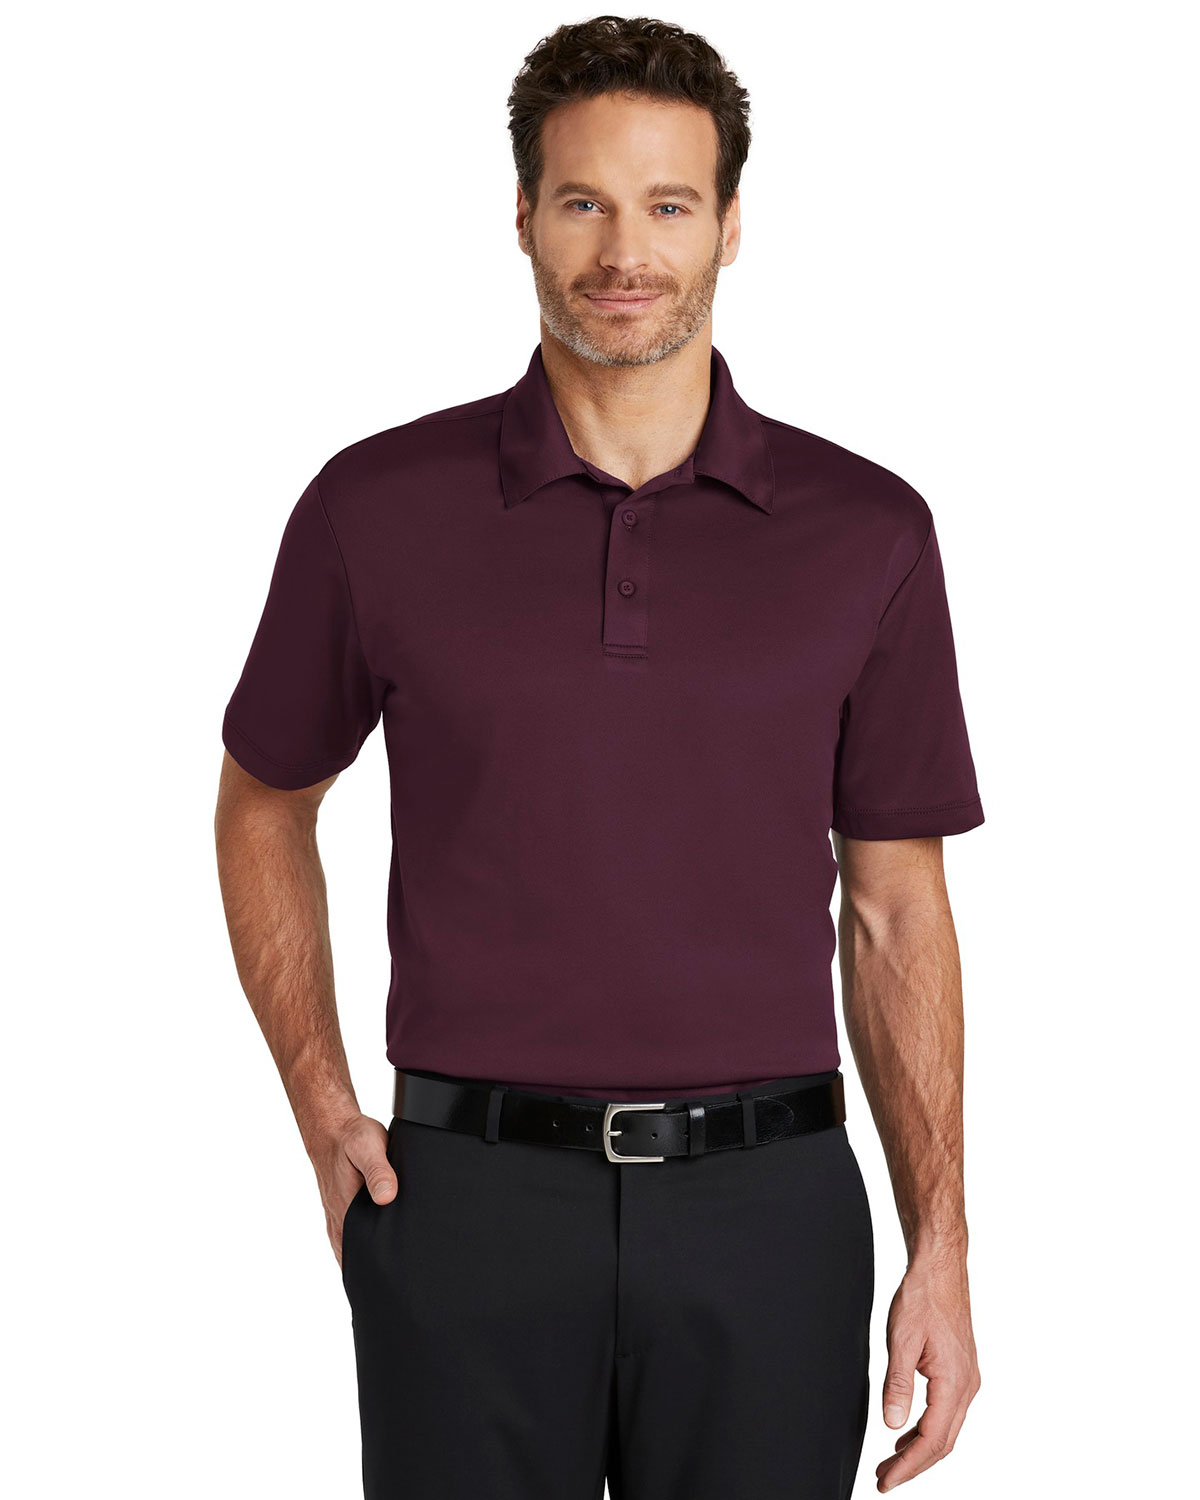 Port Authority K540 Men Silk Touch Performance Polo at Apparelstation